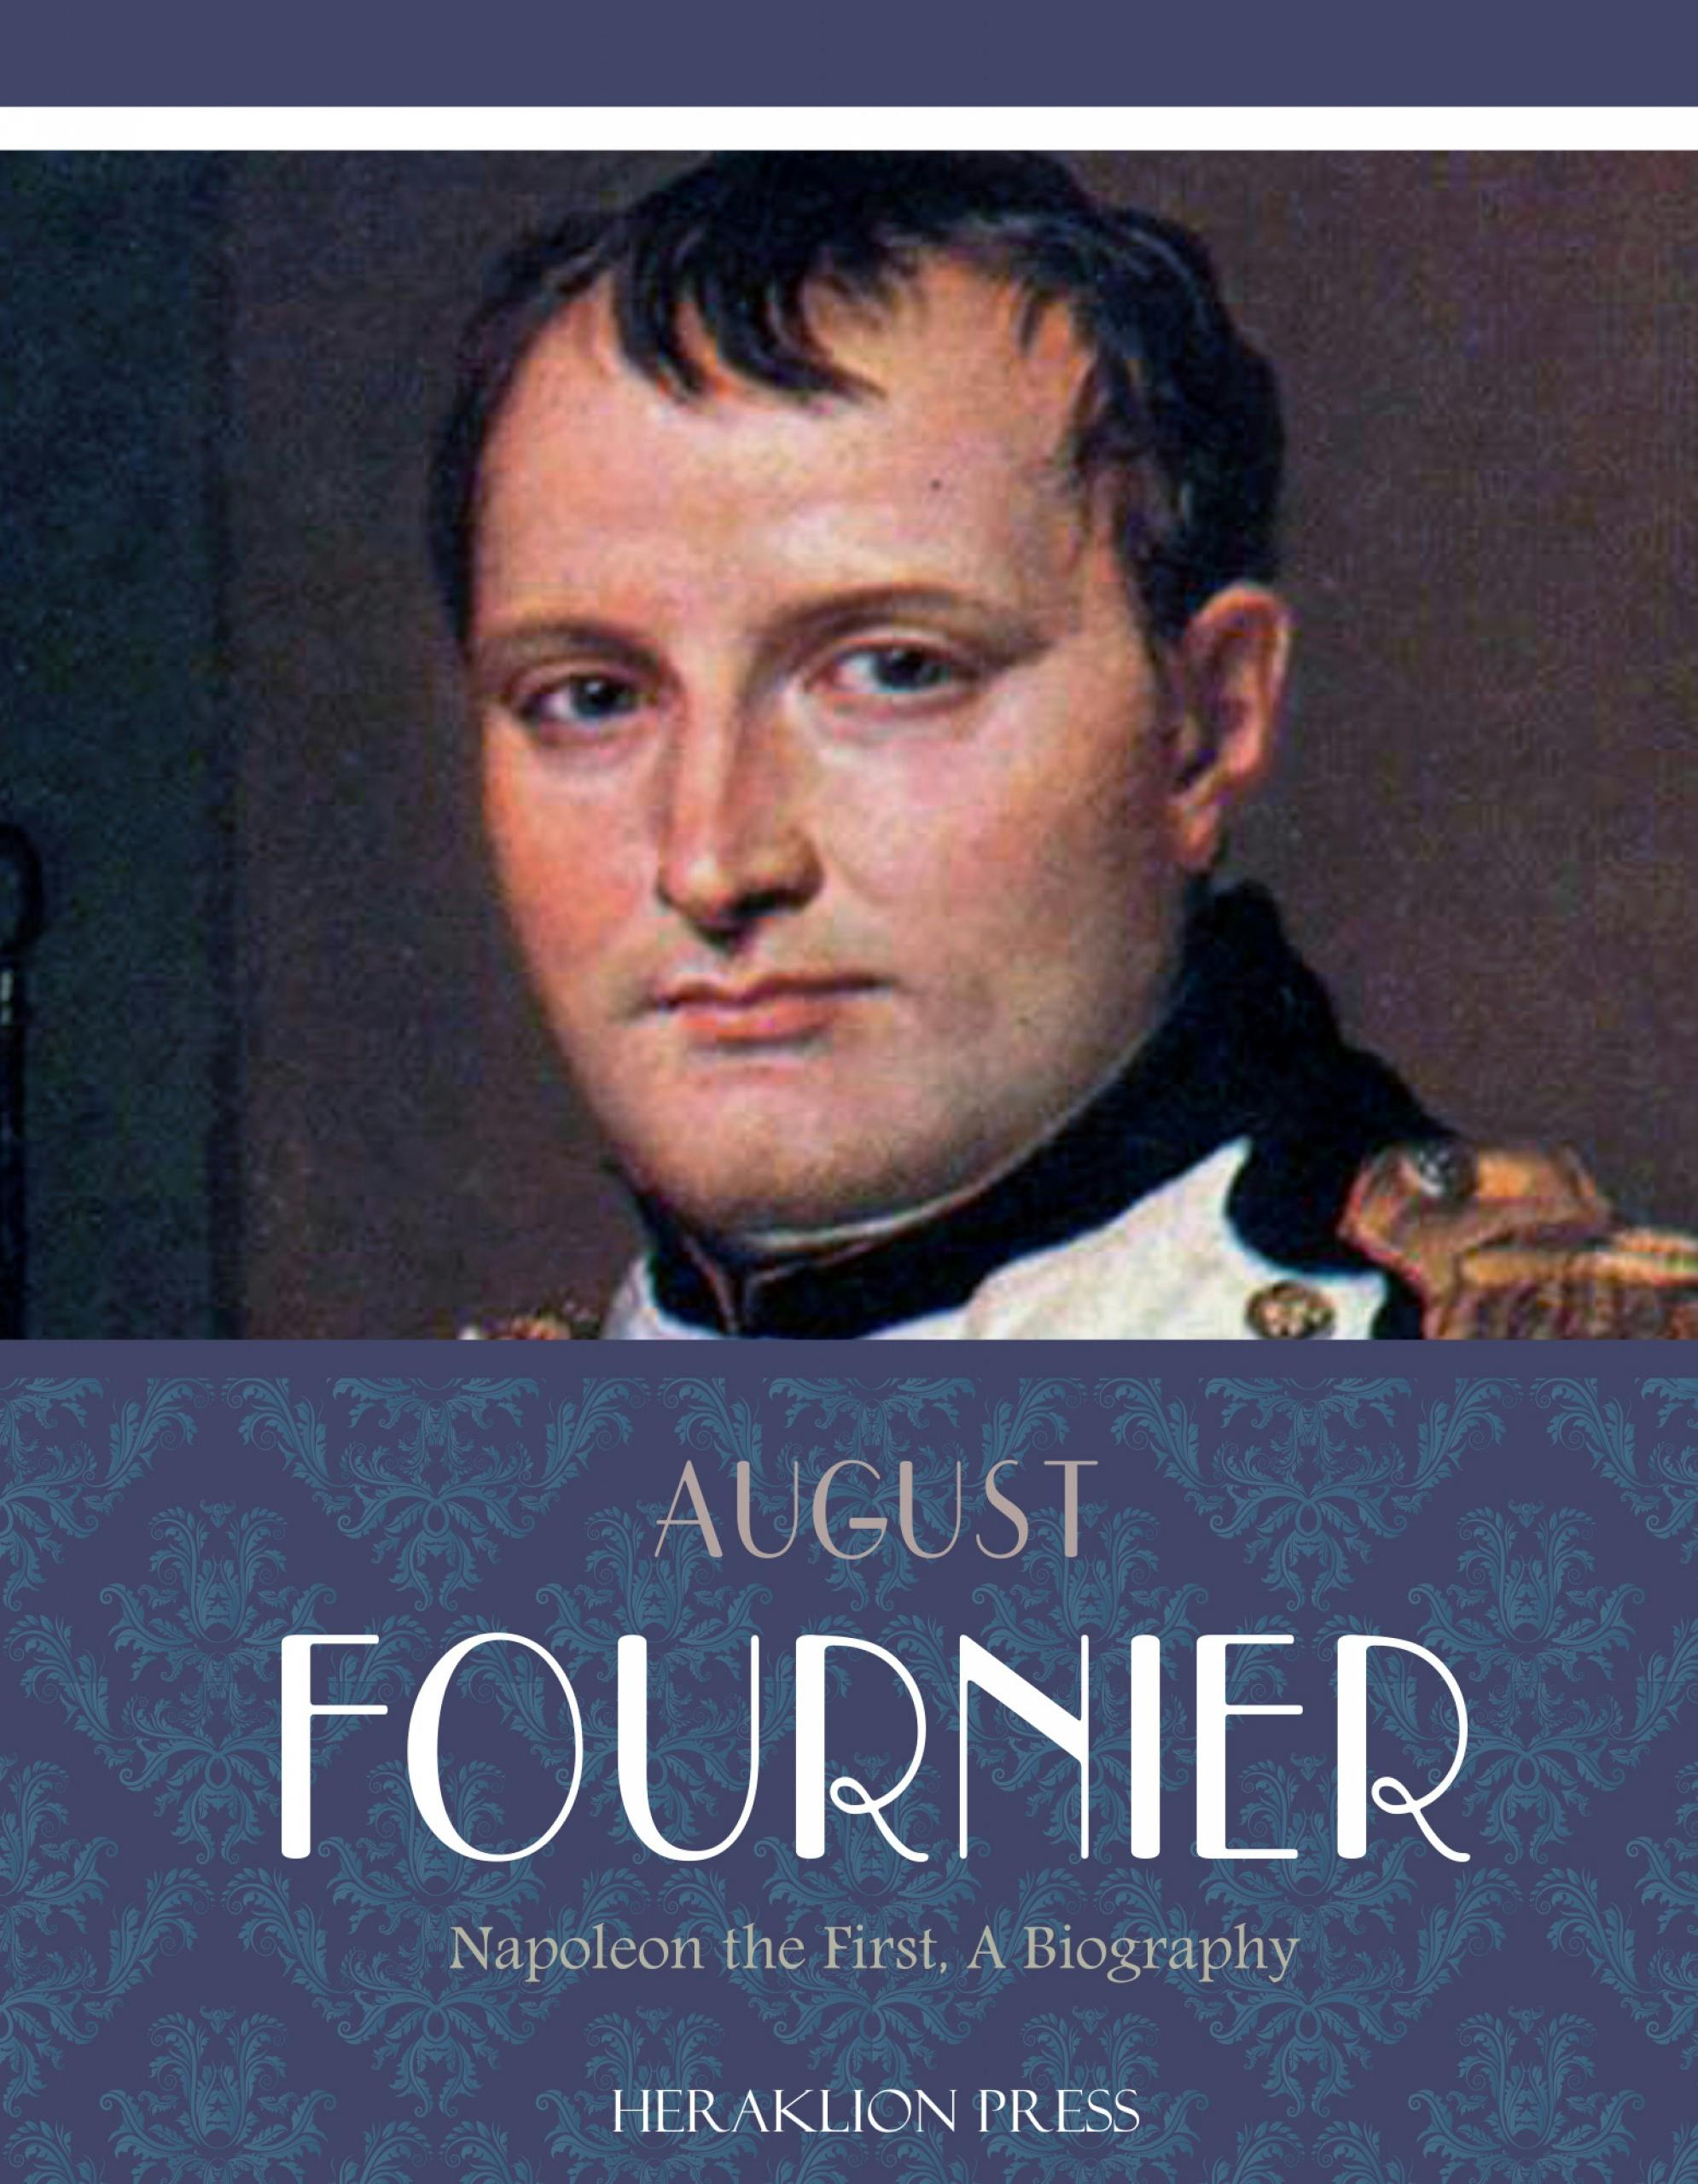 Napoleon the First, a Biography - August Fournier